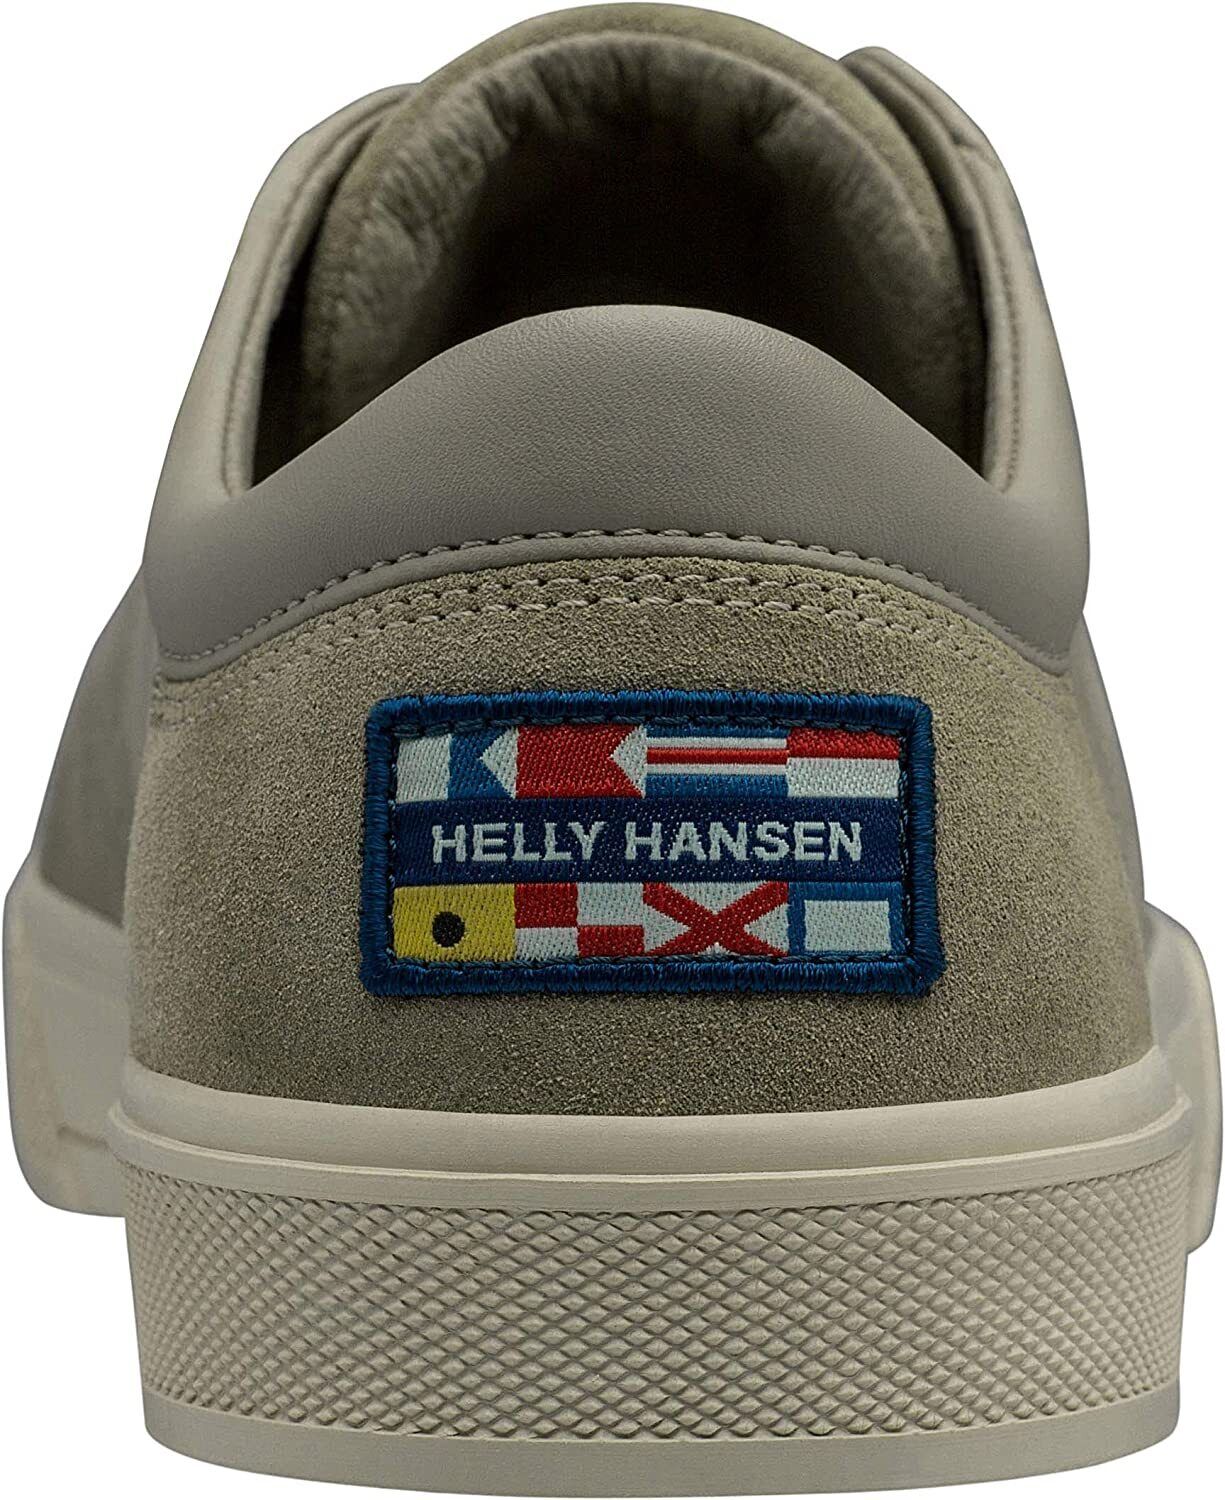 Mens Helly Hansen Copenhagen 11502 718 Grey Leather Lace Up Low Shoes - London Top Style